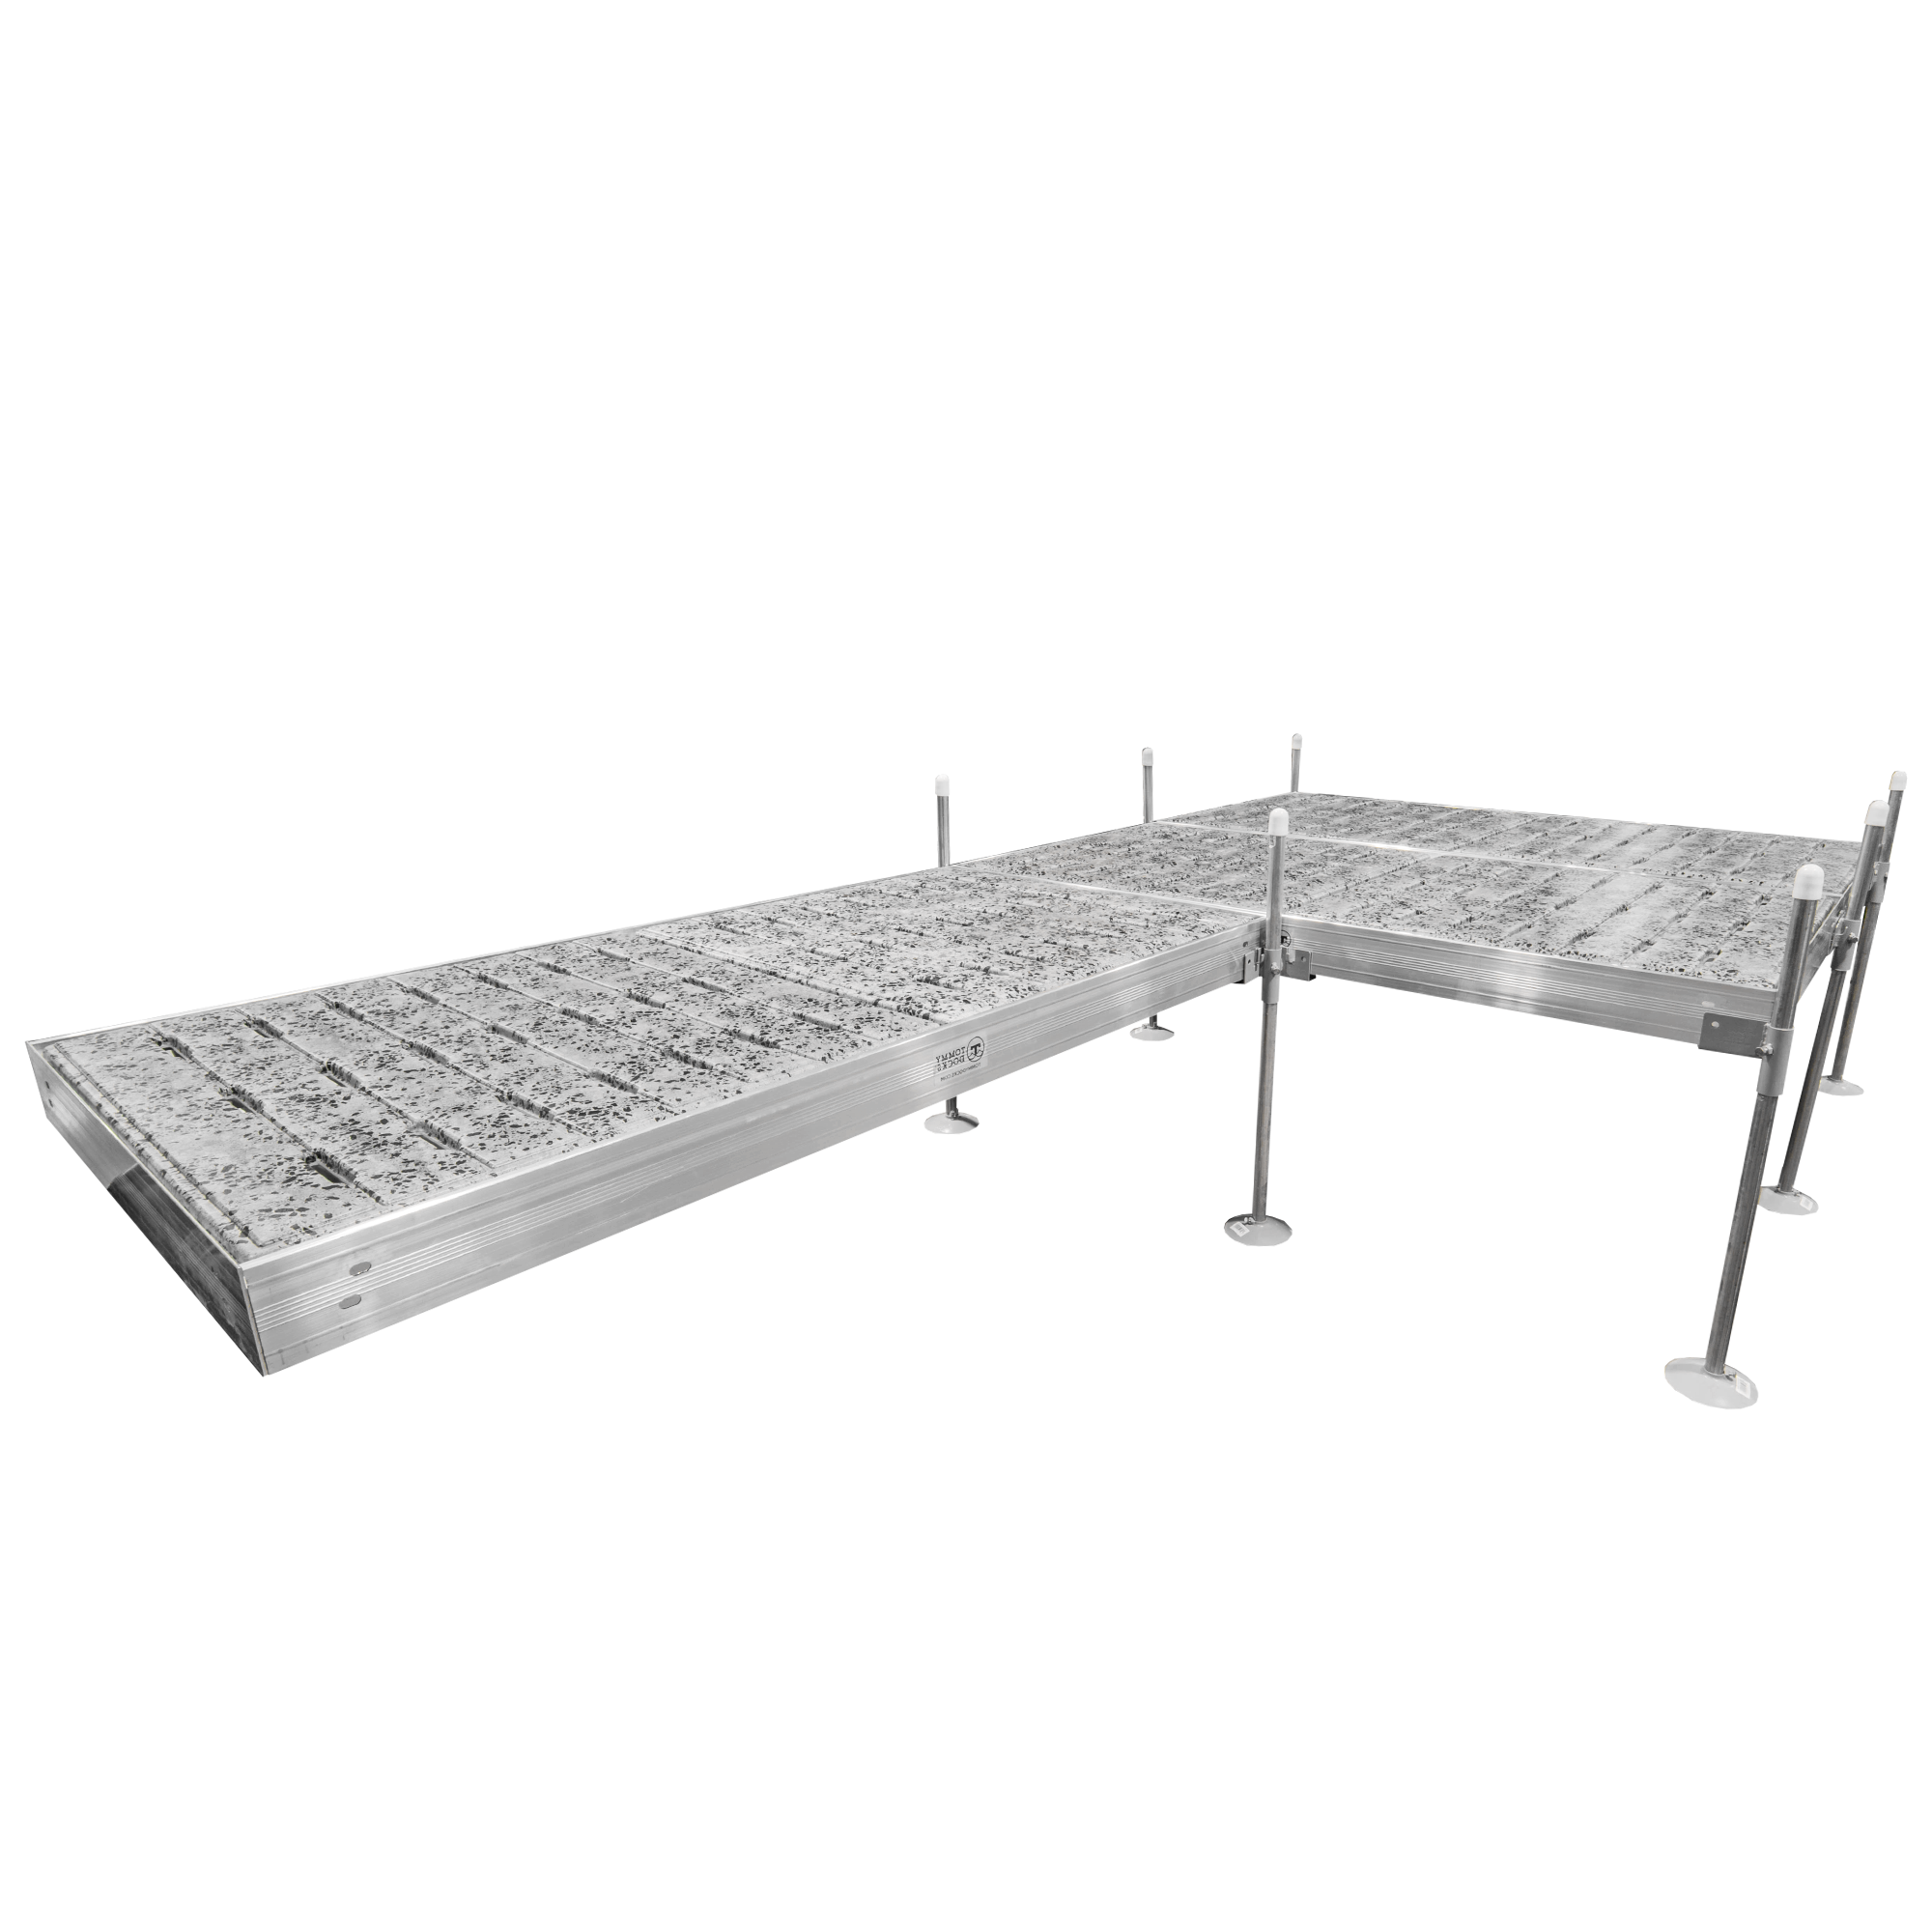 16' Platform Boat Dock System with Aluminum Frame and Thermoformed Terrazzo Decking